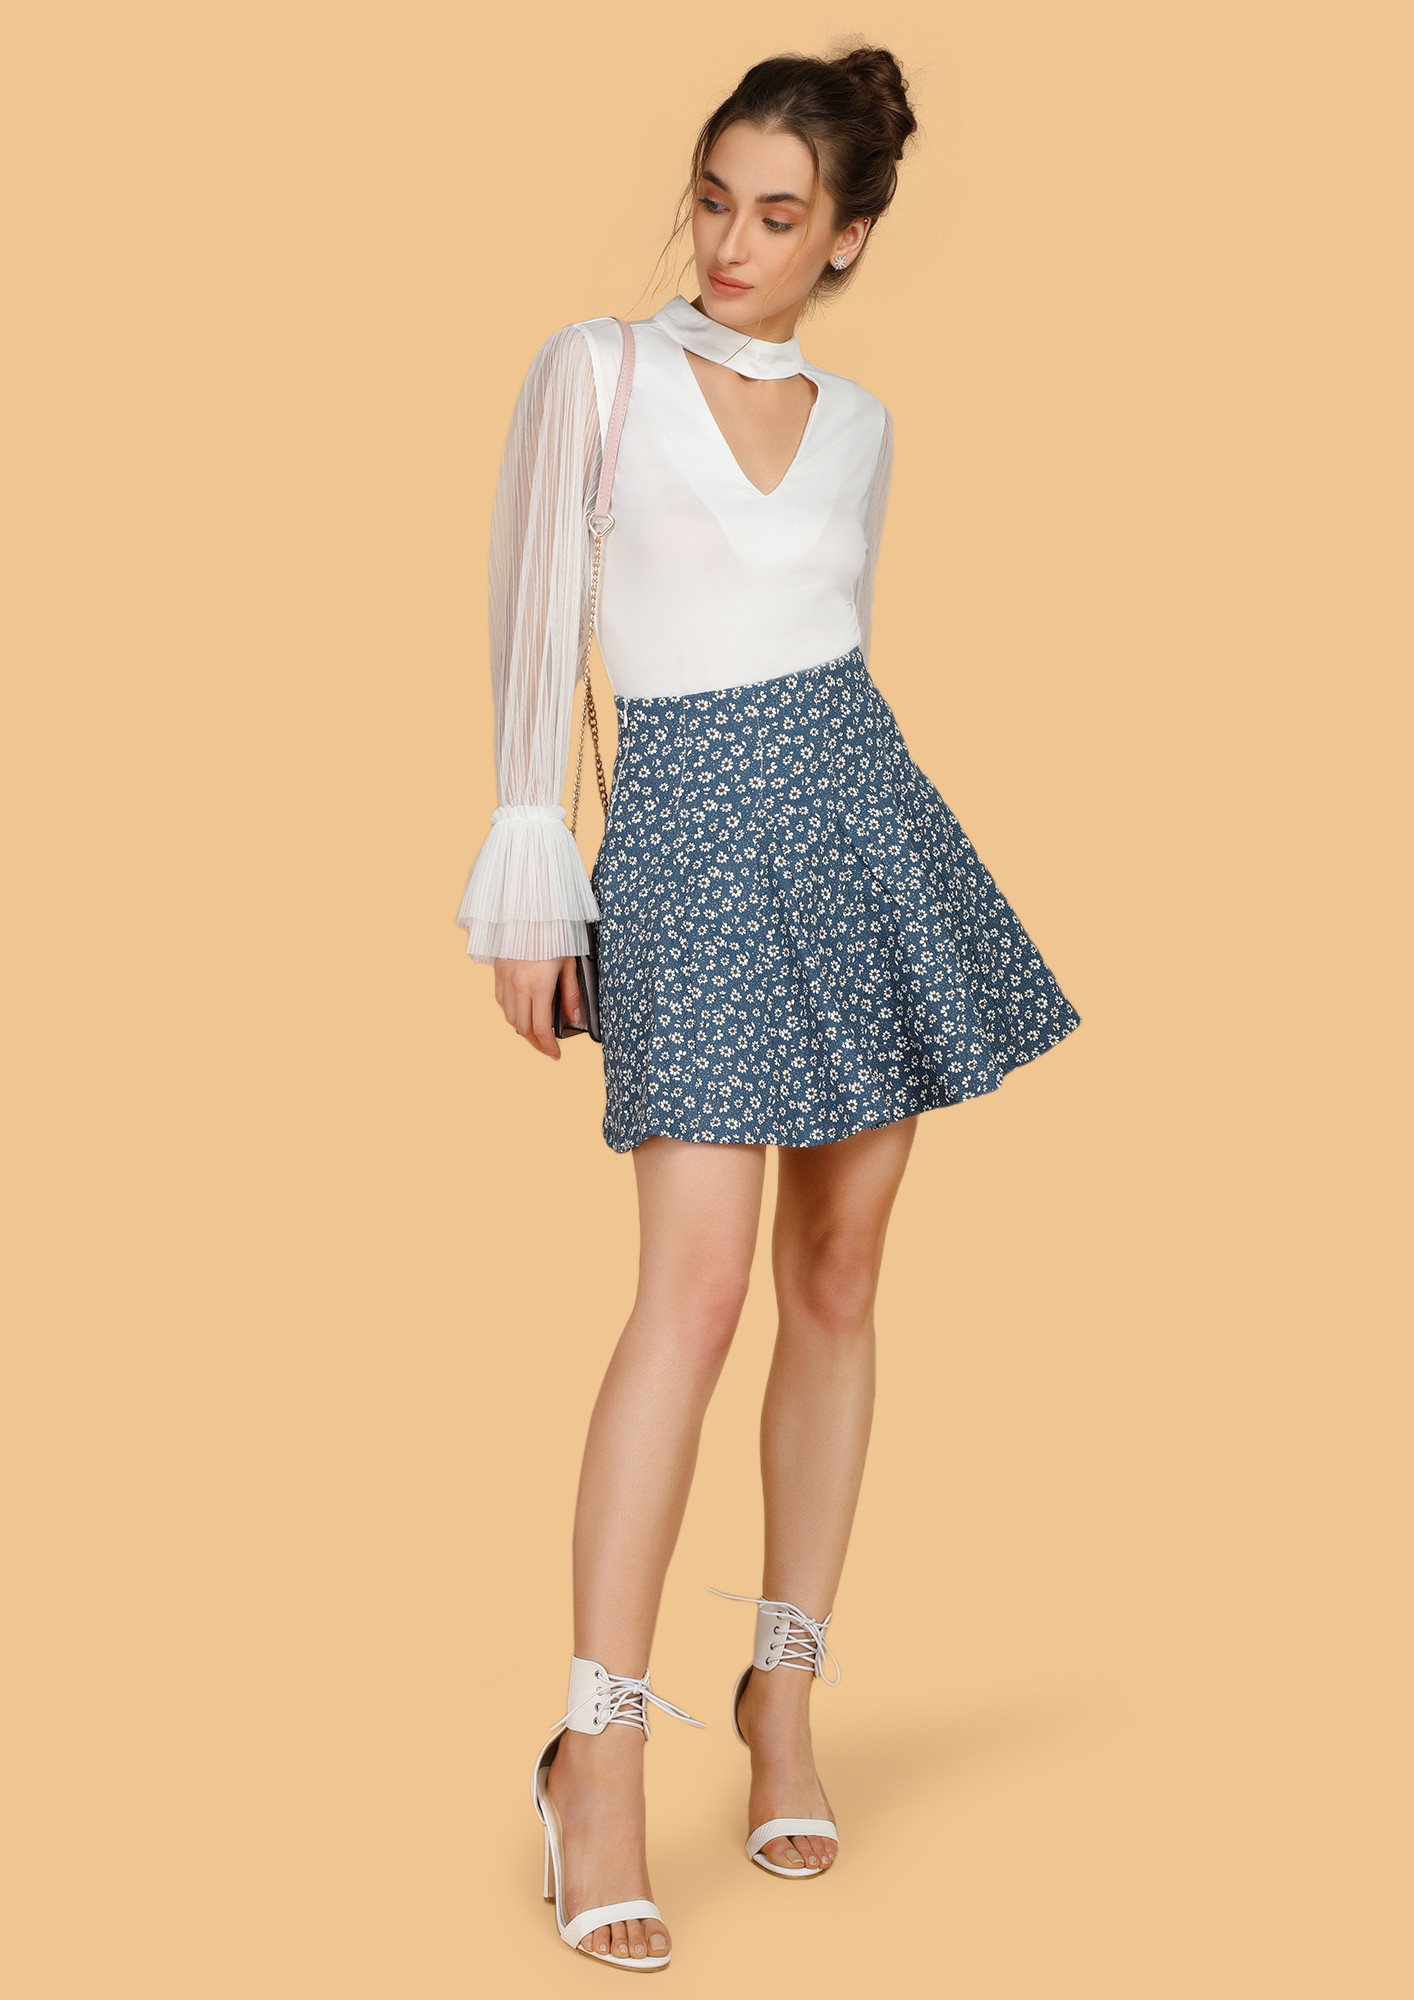 Just A Thought Denim Skirt In Light Wash | Showpo USA